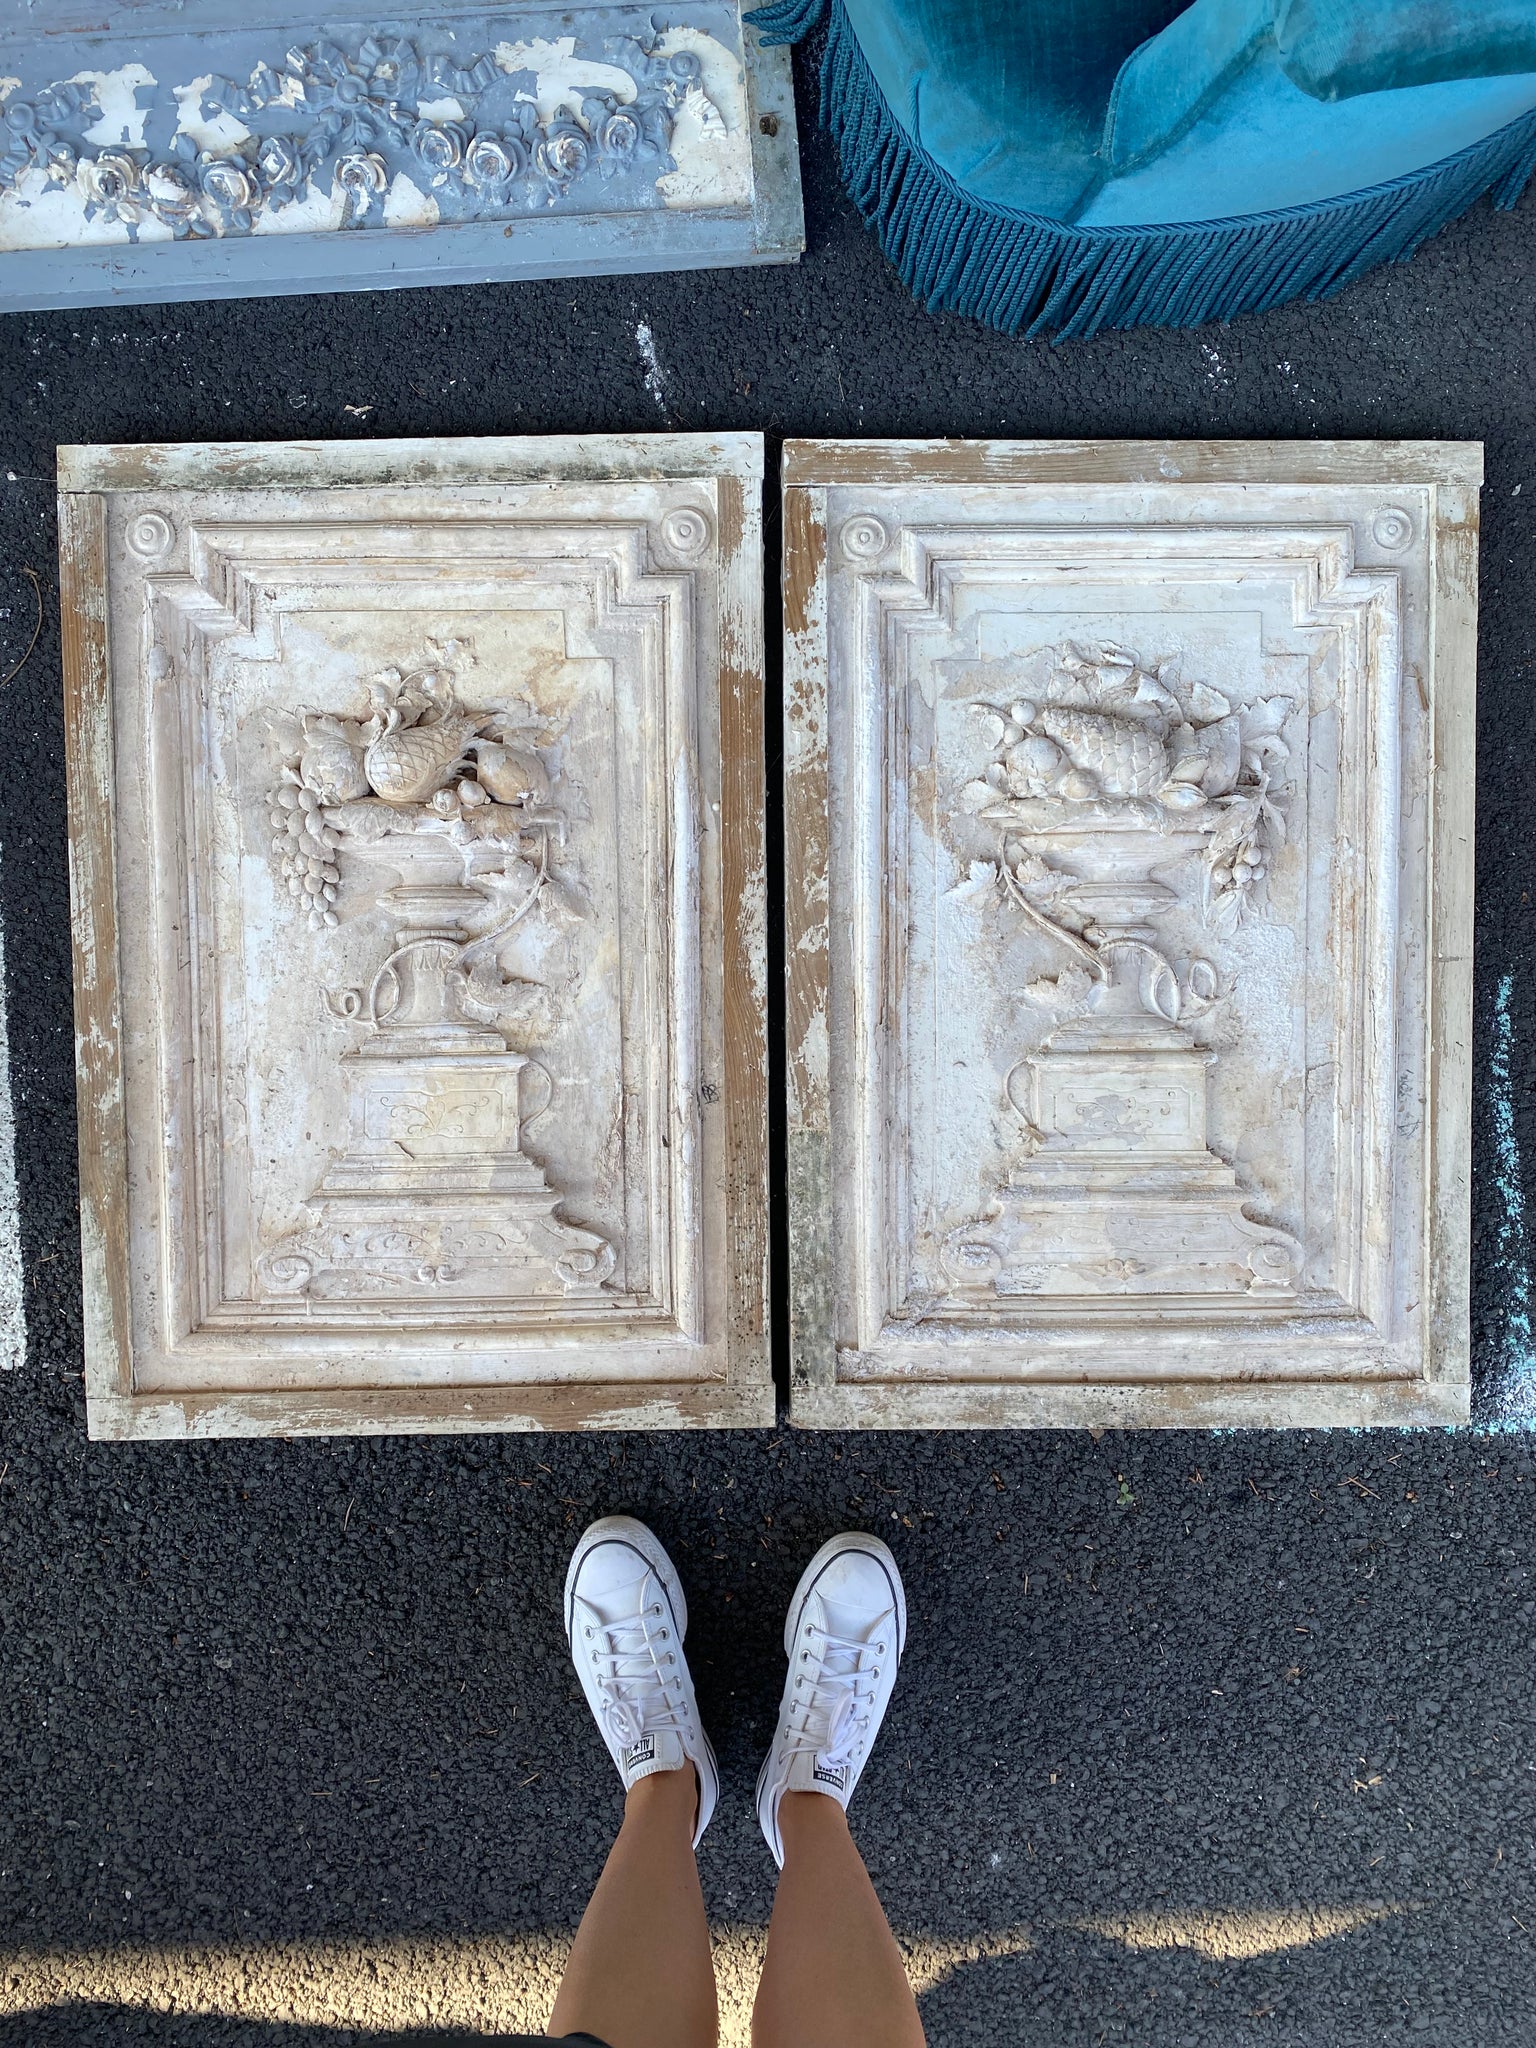 Pair French Panels